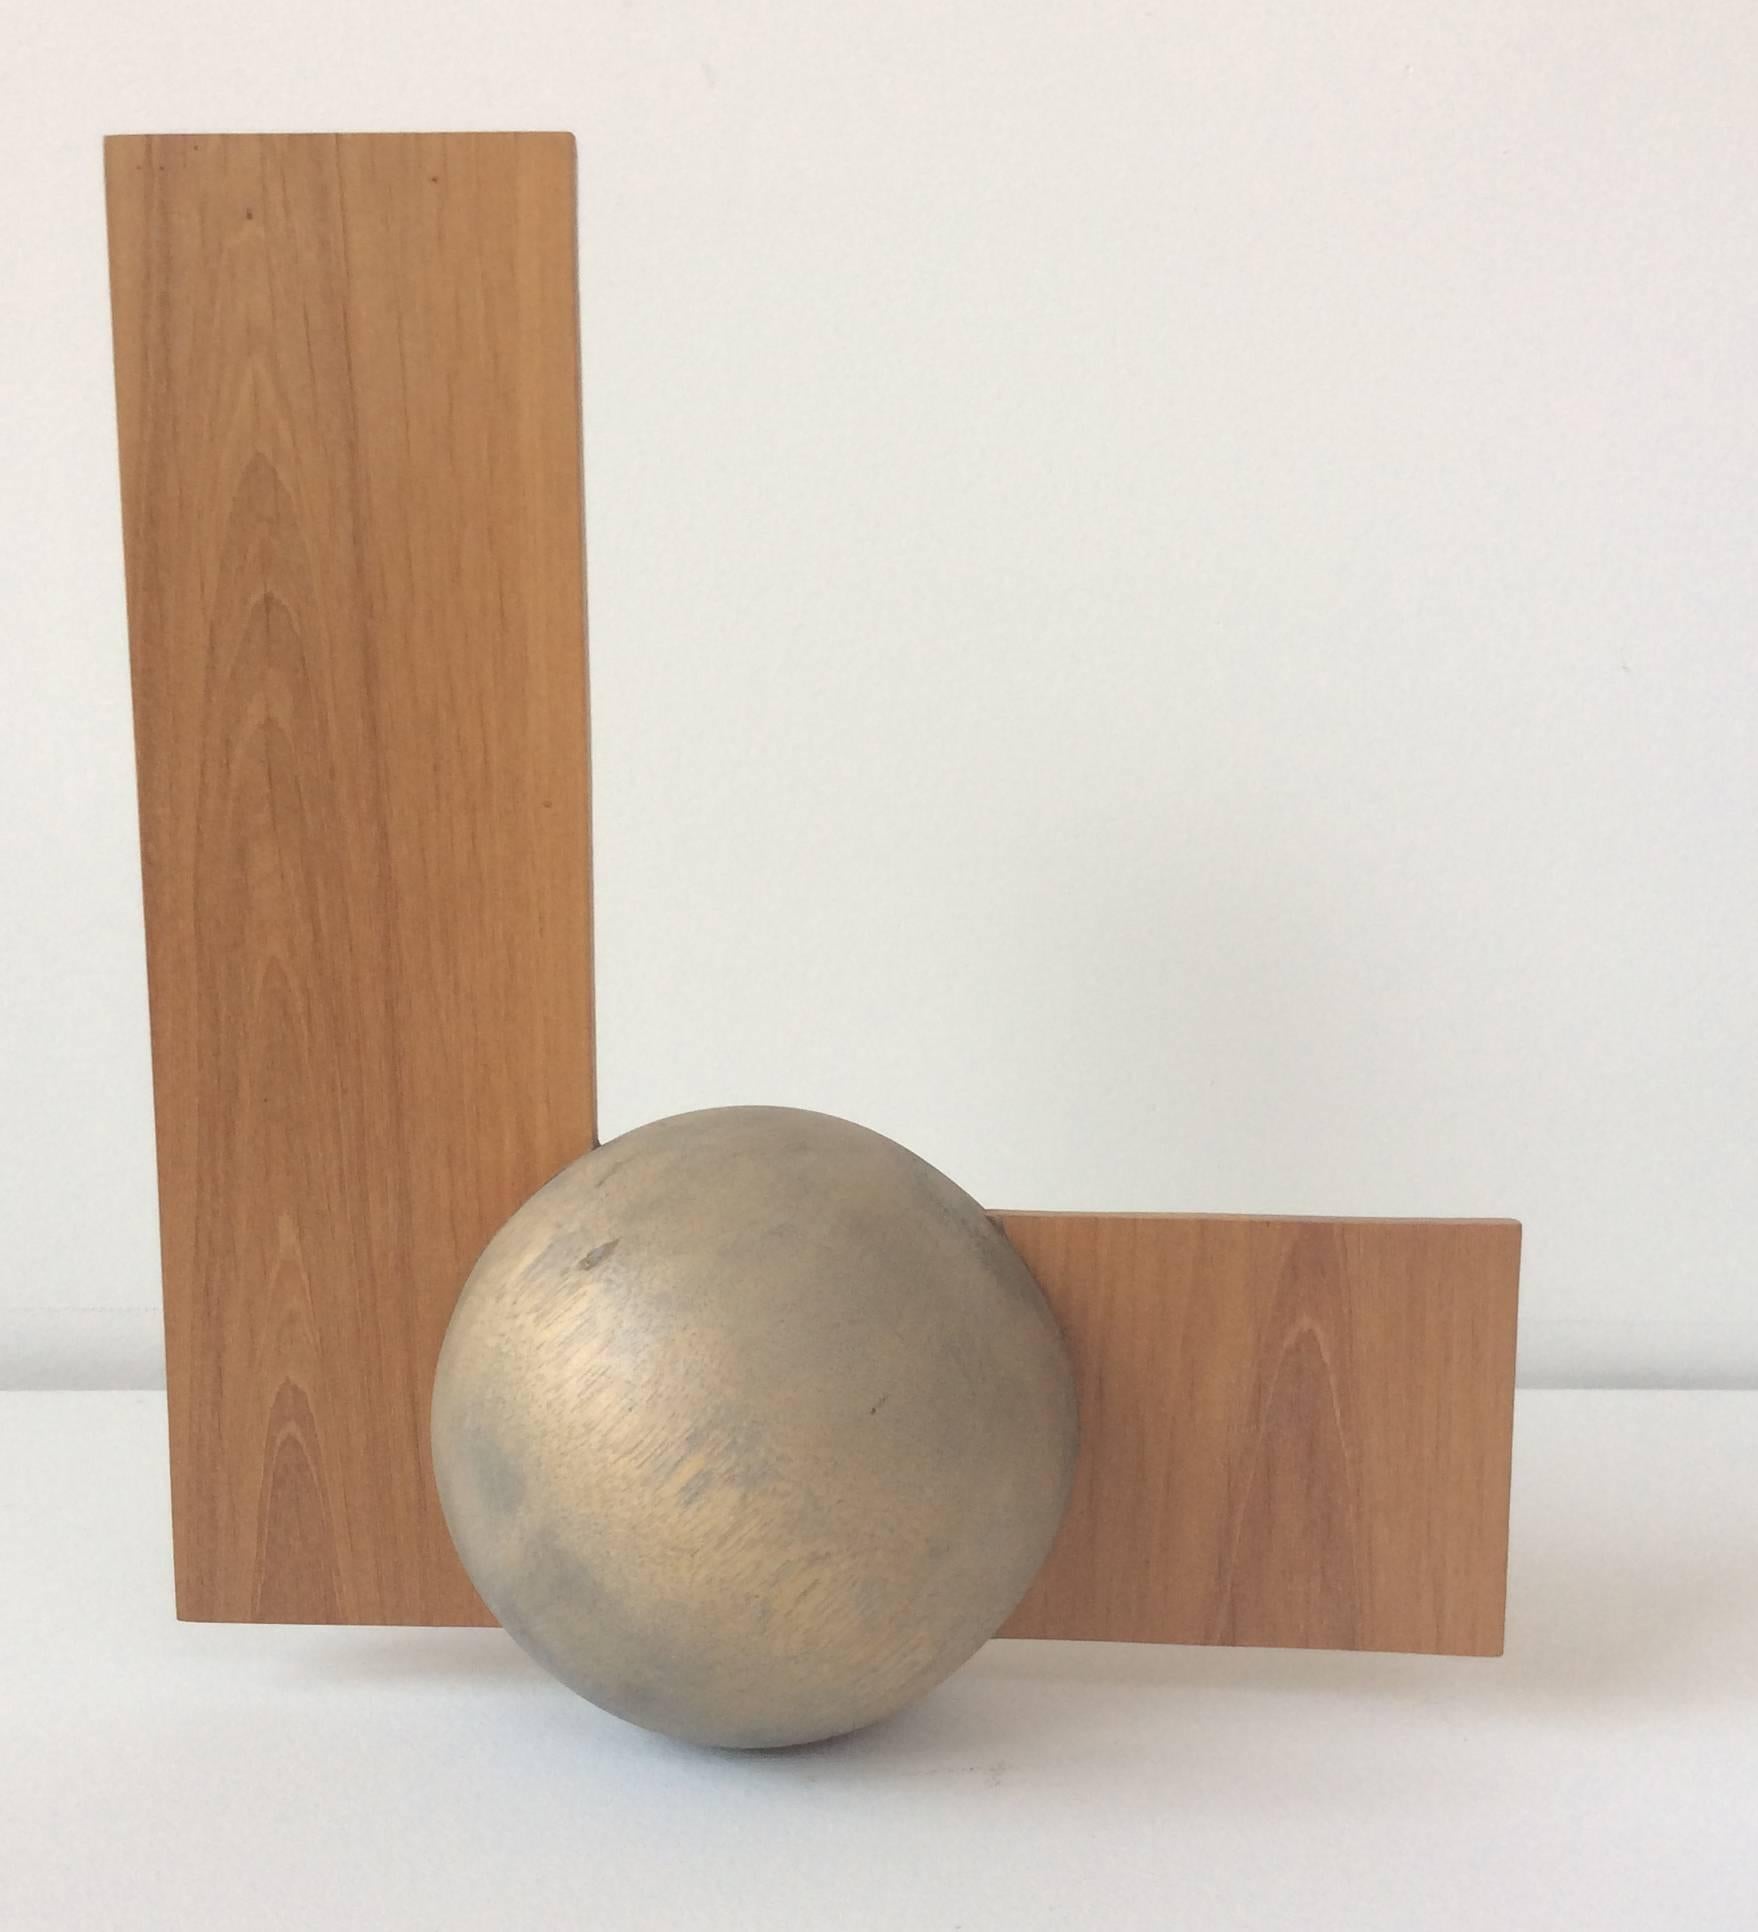 Leon Smith Abstract Sculpture - El (Small Abstract Wood Sculpture in Mid Century Modern Style)